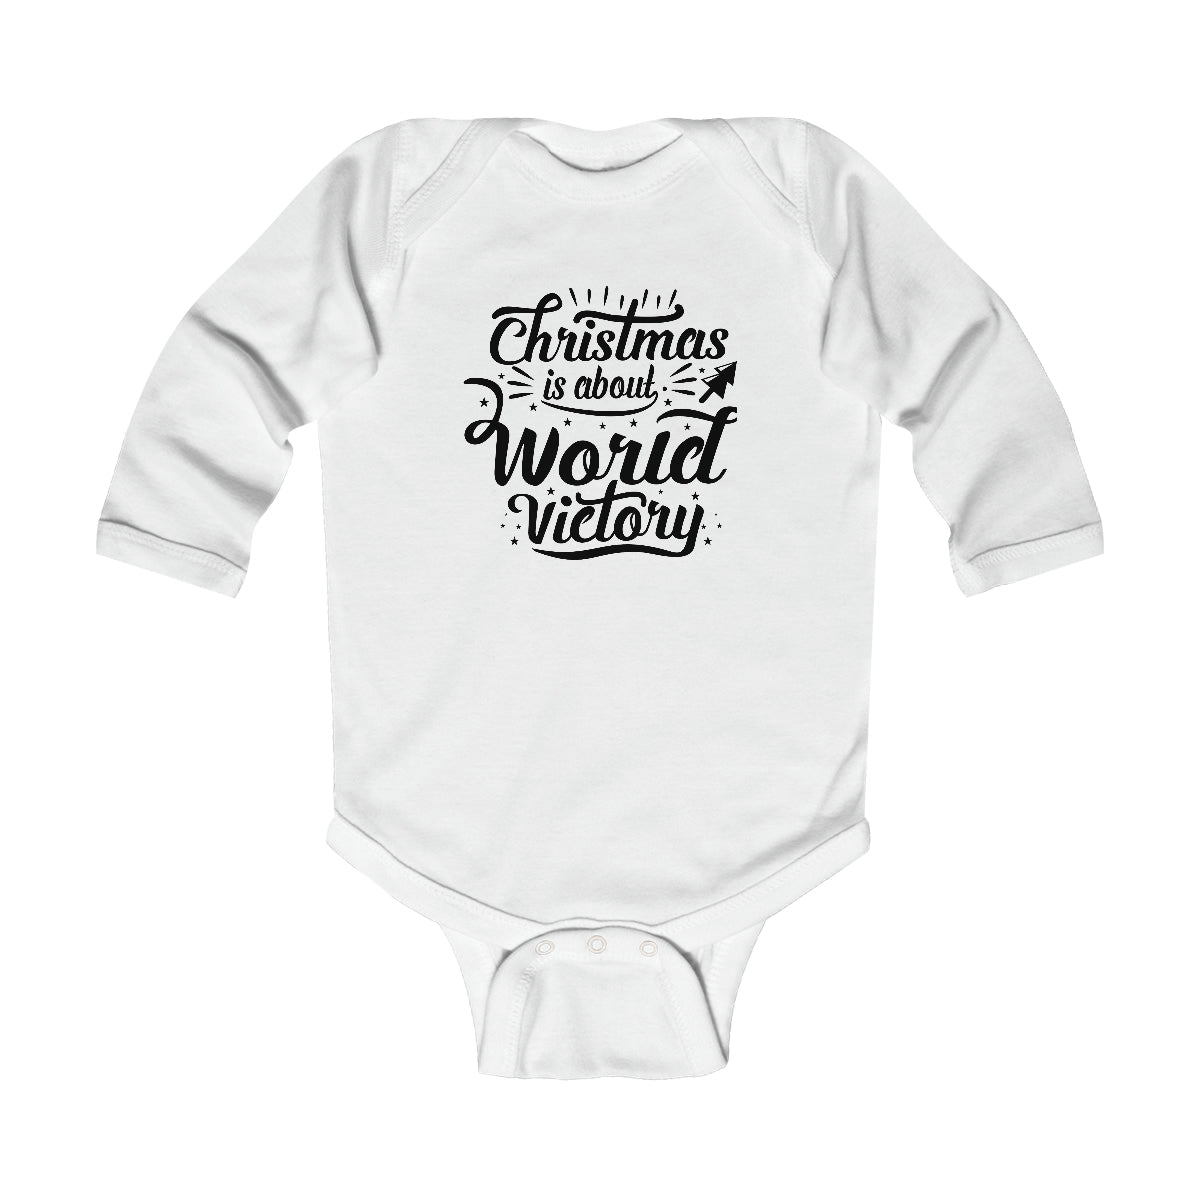 Christmas is about Hope victory Long Sleeve Baby Bodysuit, Merry Christmas, Christmas Long Sleeve Baby Bodysuit, Infant Long Sleeve Bodysuit, Merry Christmas Long Sleeve Baby Bodysuit